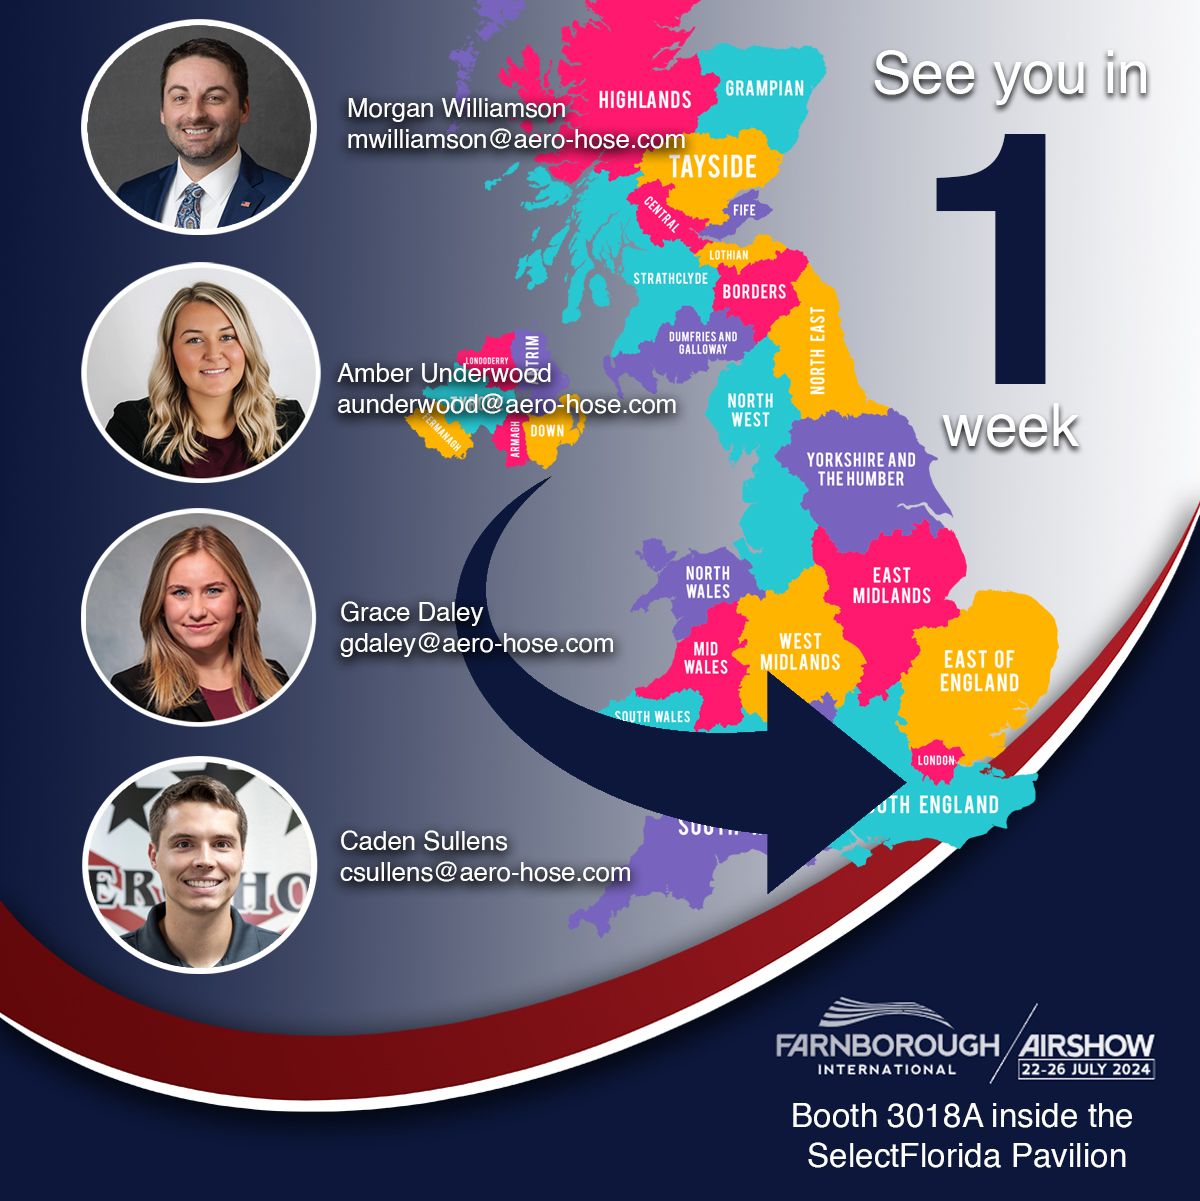 promotional flyer for farnborough international airshow featuring aero-hose team members, regional map of the uk, and booth location details for july 22-26, 2024. don't miss our auto draft demonstration!